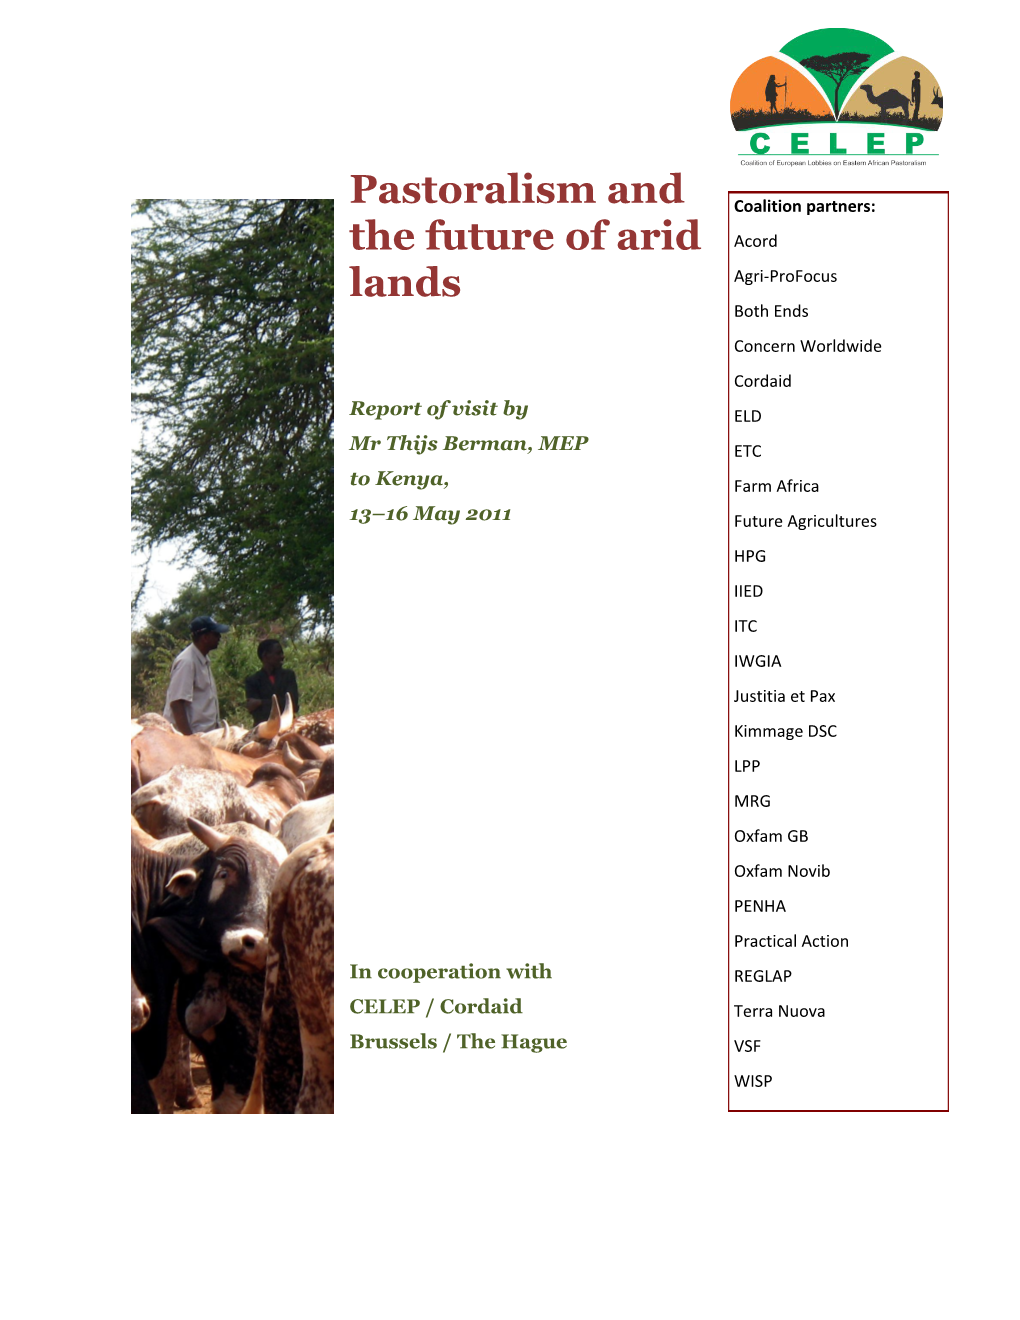 Pastoralists and the Future of Arid Lands